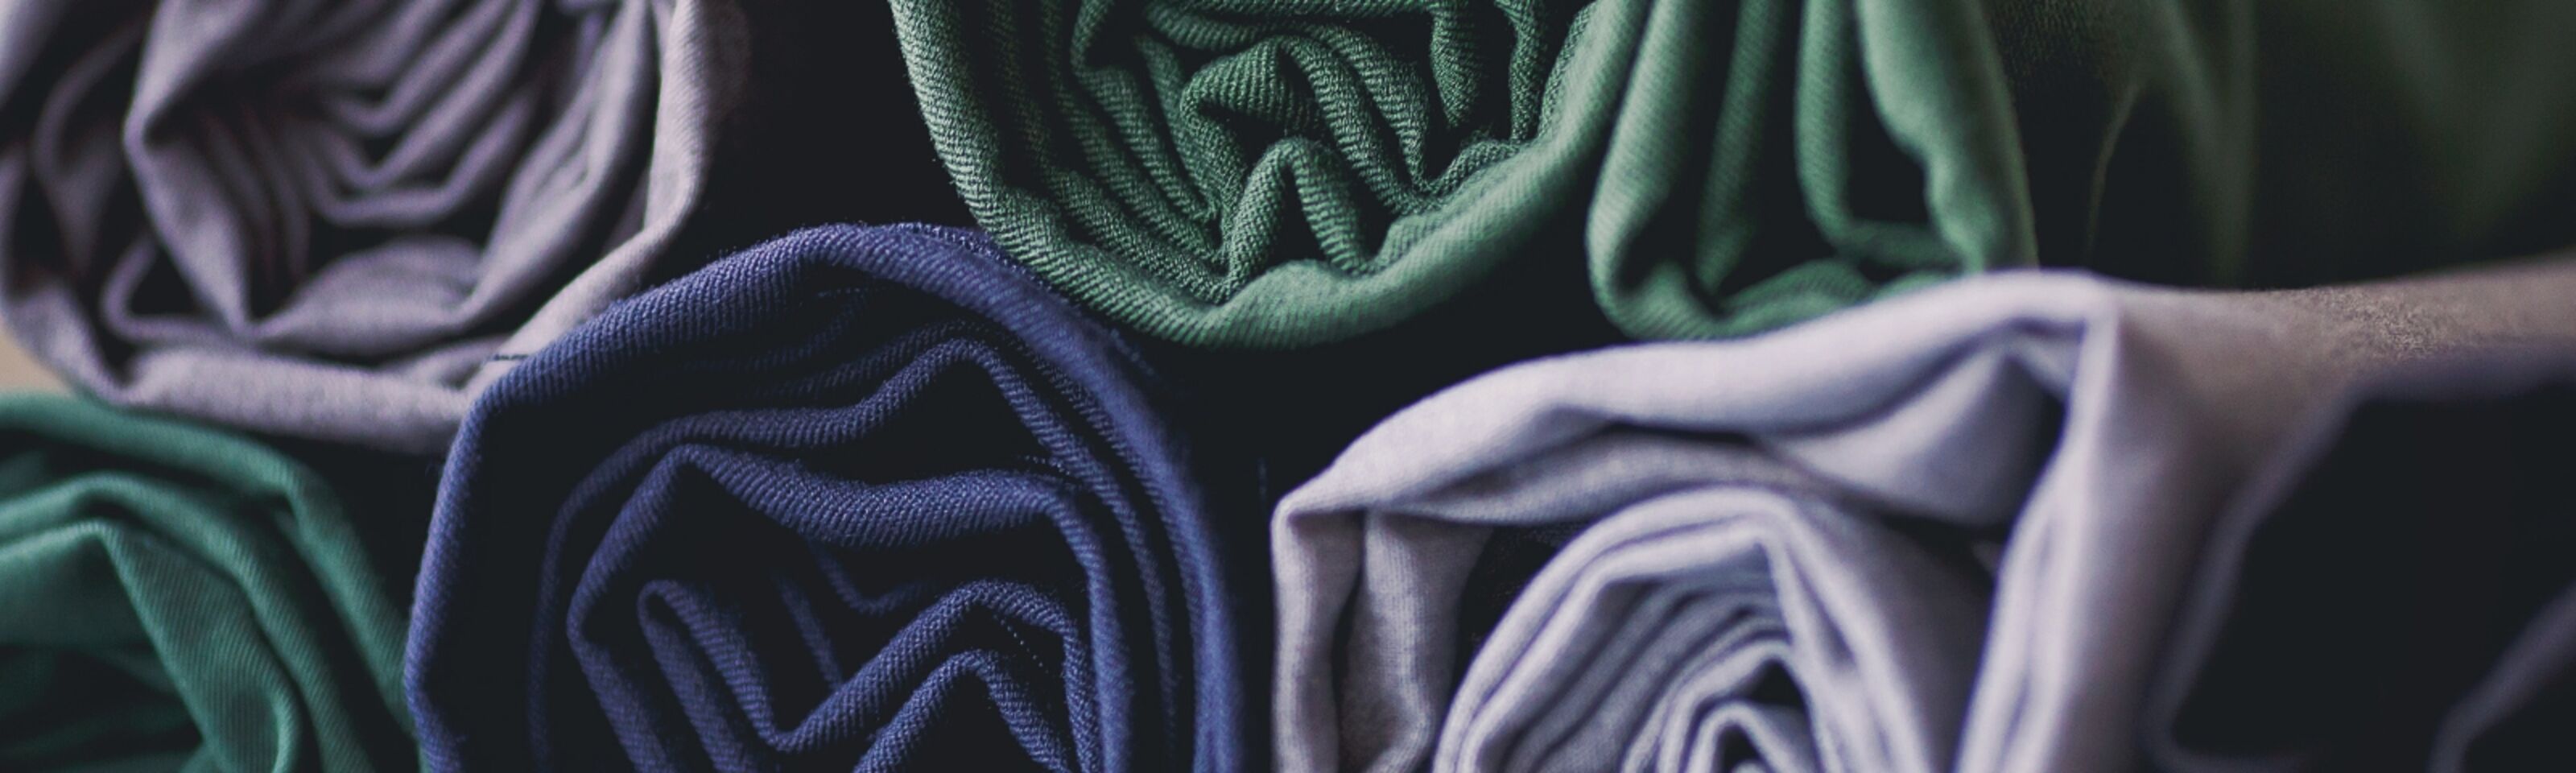 Fabric Guide: What Is Modal Fabric? Understanding How Modal Is